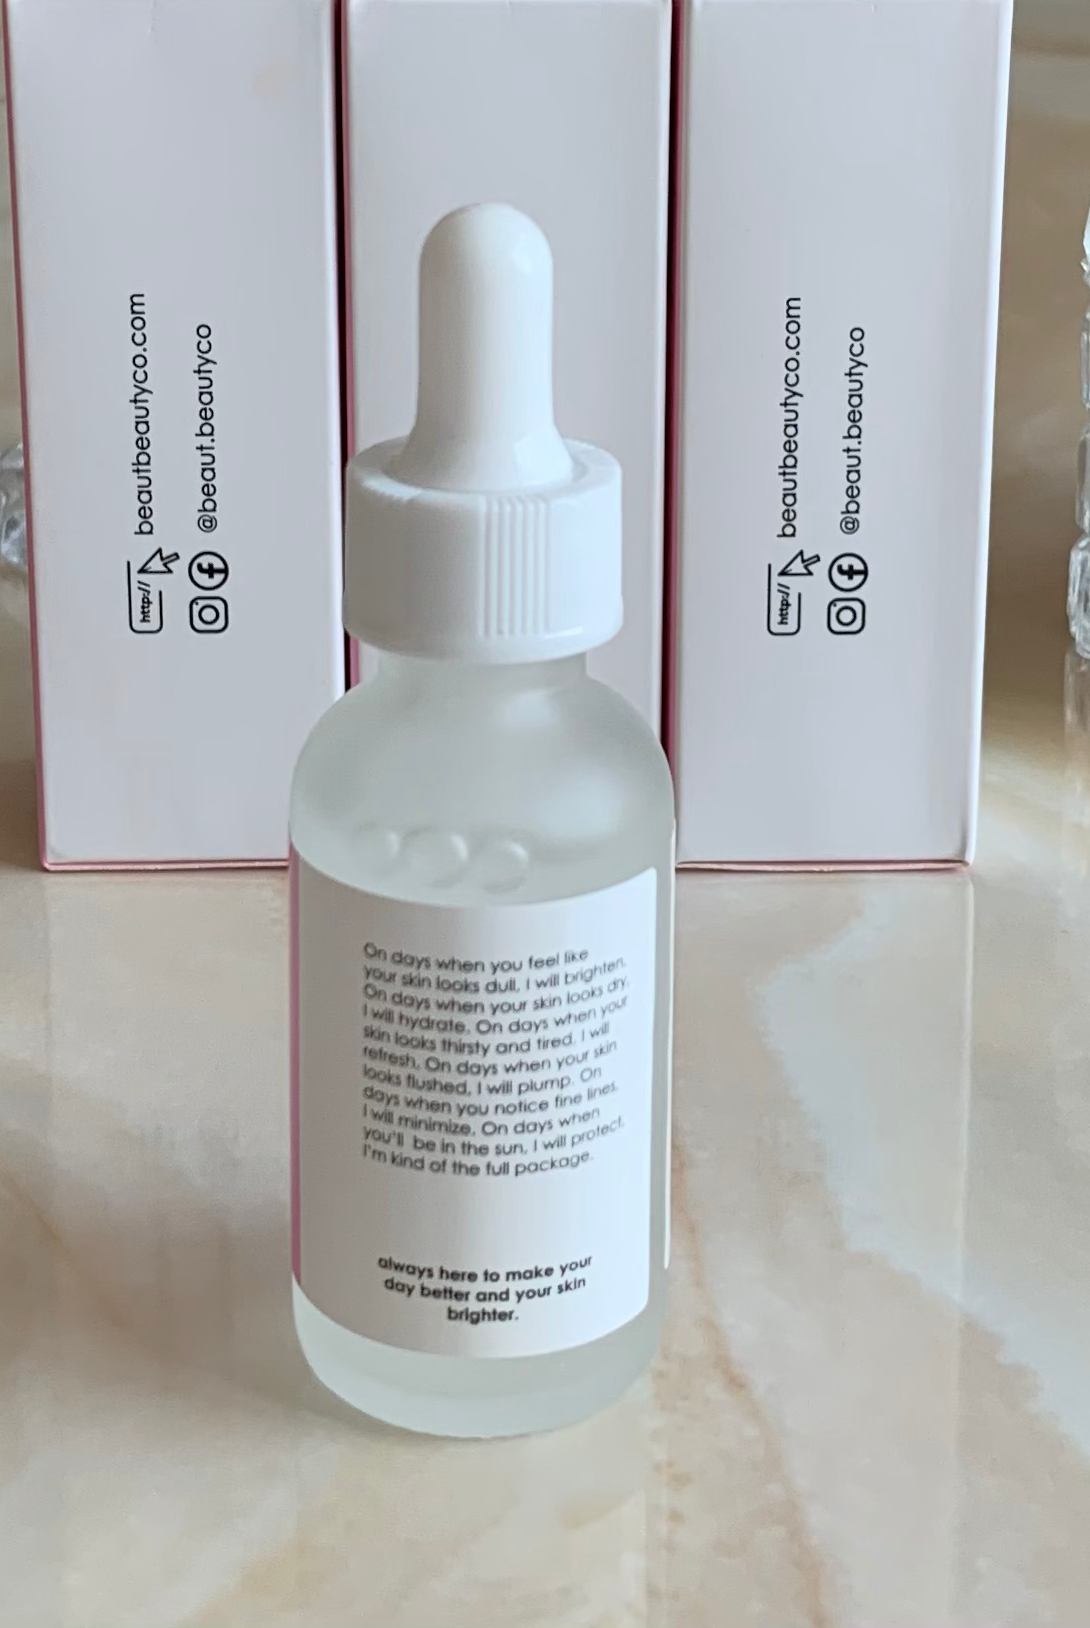 h2o boost hyaluronic acid serum-Bath & Body-beaut.beautyco.-The Lovely Closet, Women's Fashion Boutique in Alexandria, KY